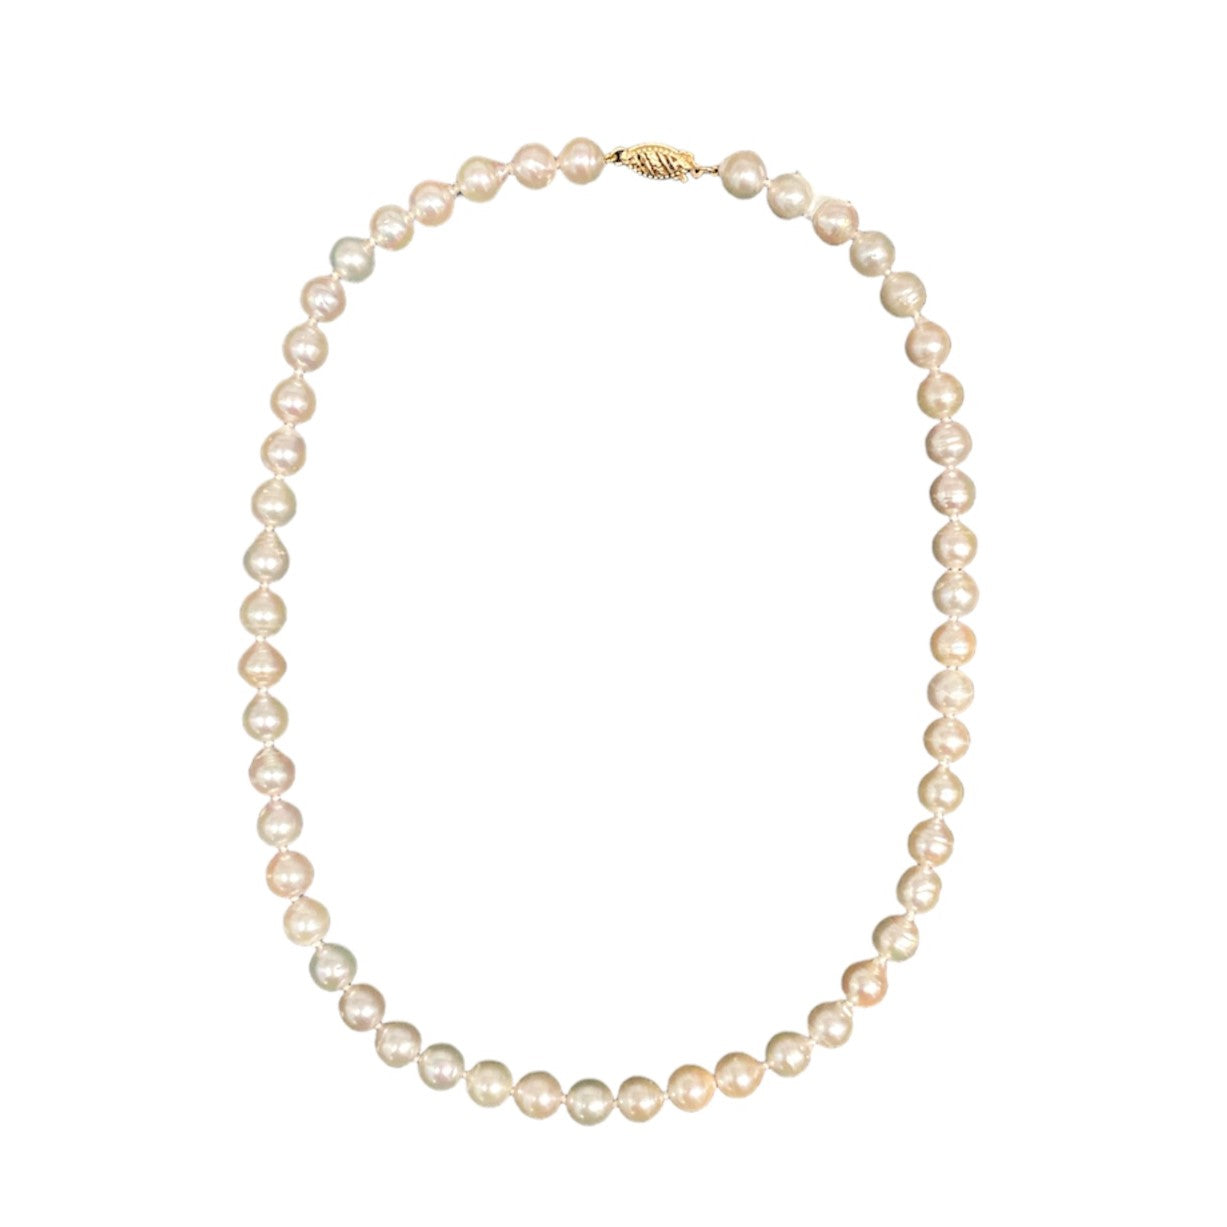 16" Freshwater Pearl Necklace